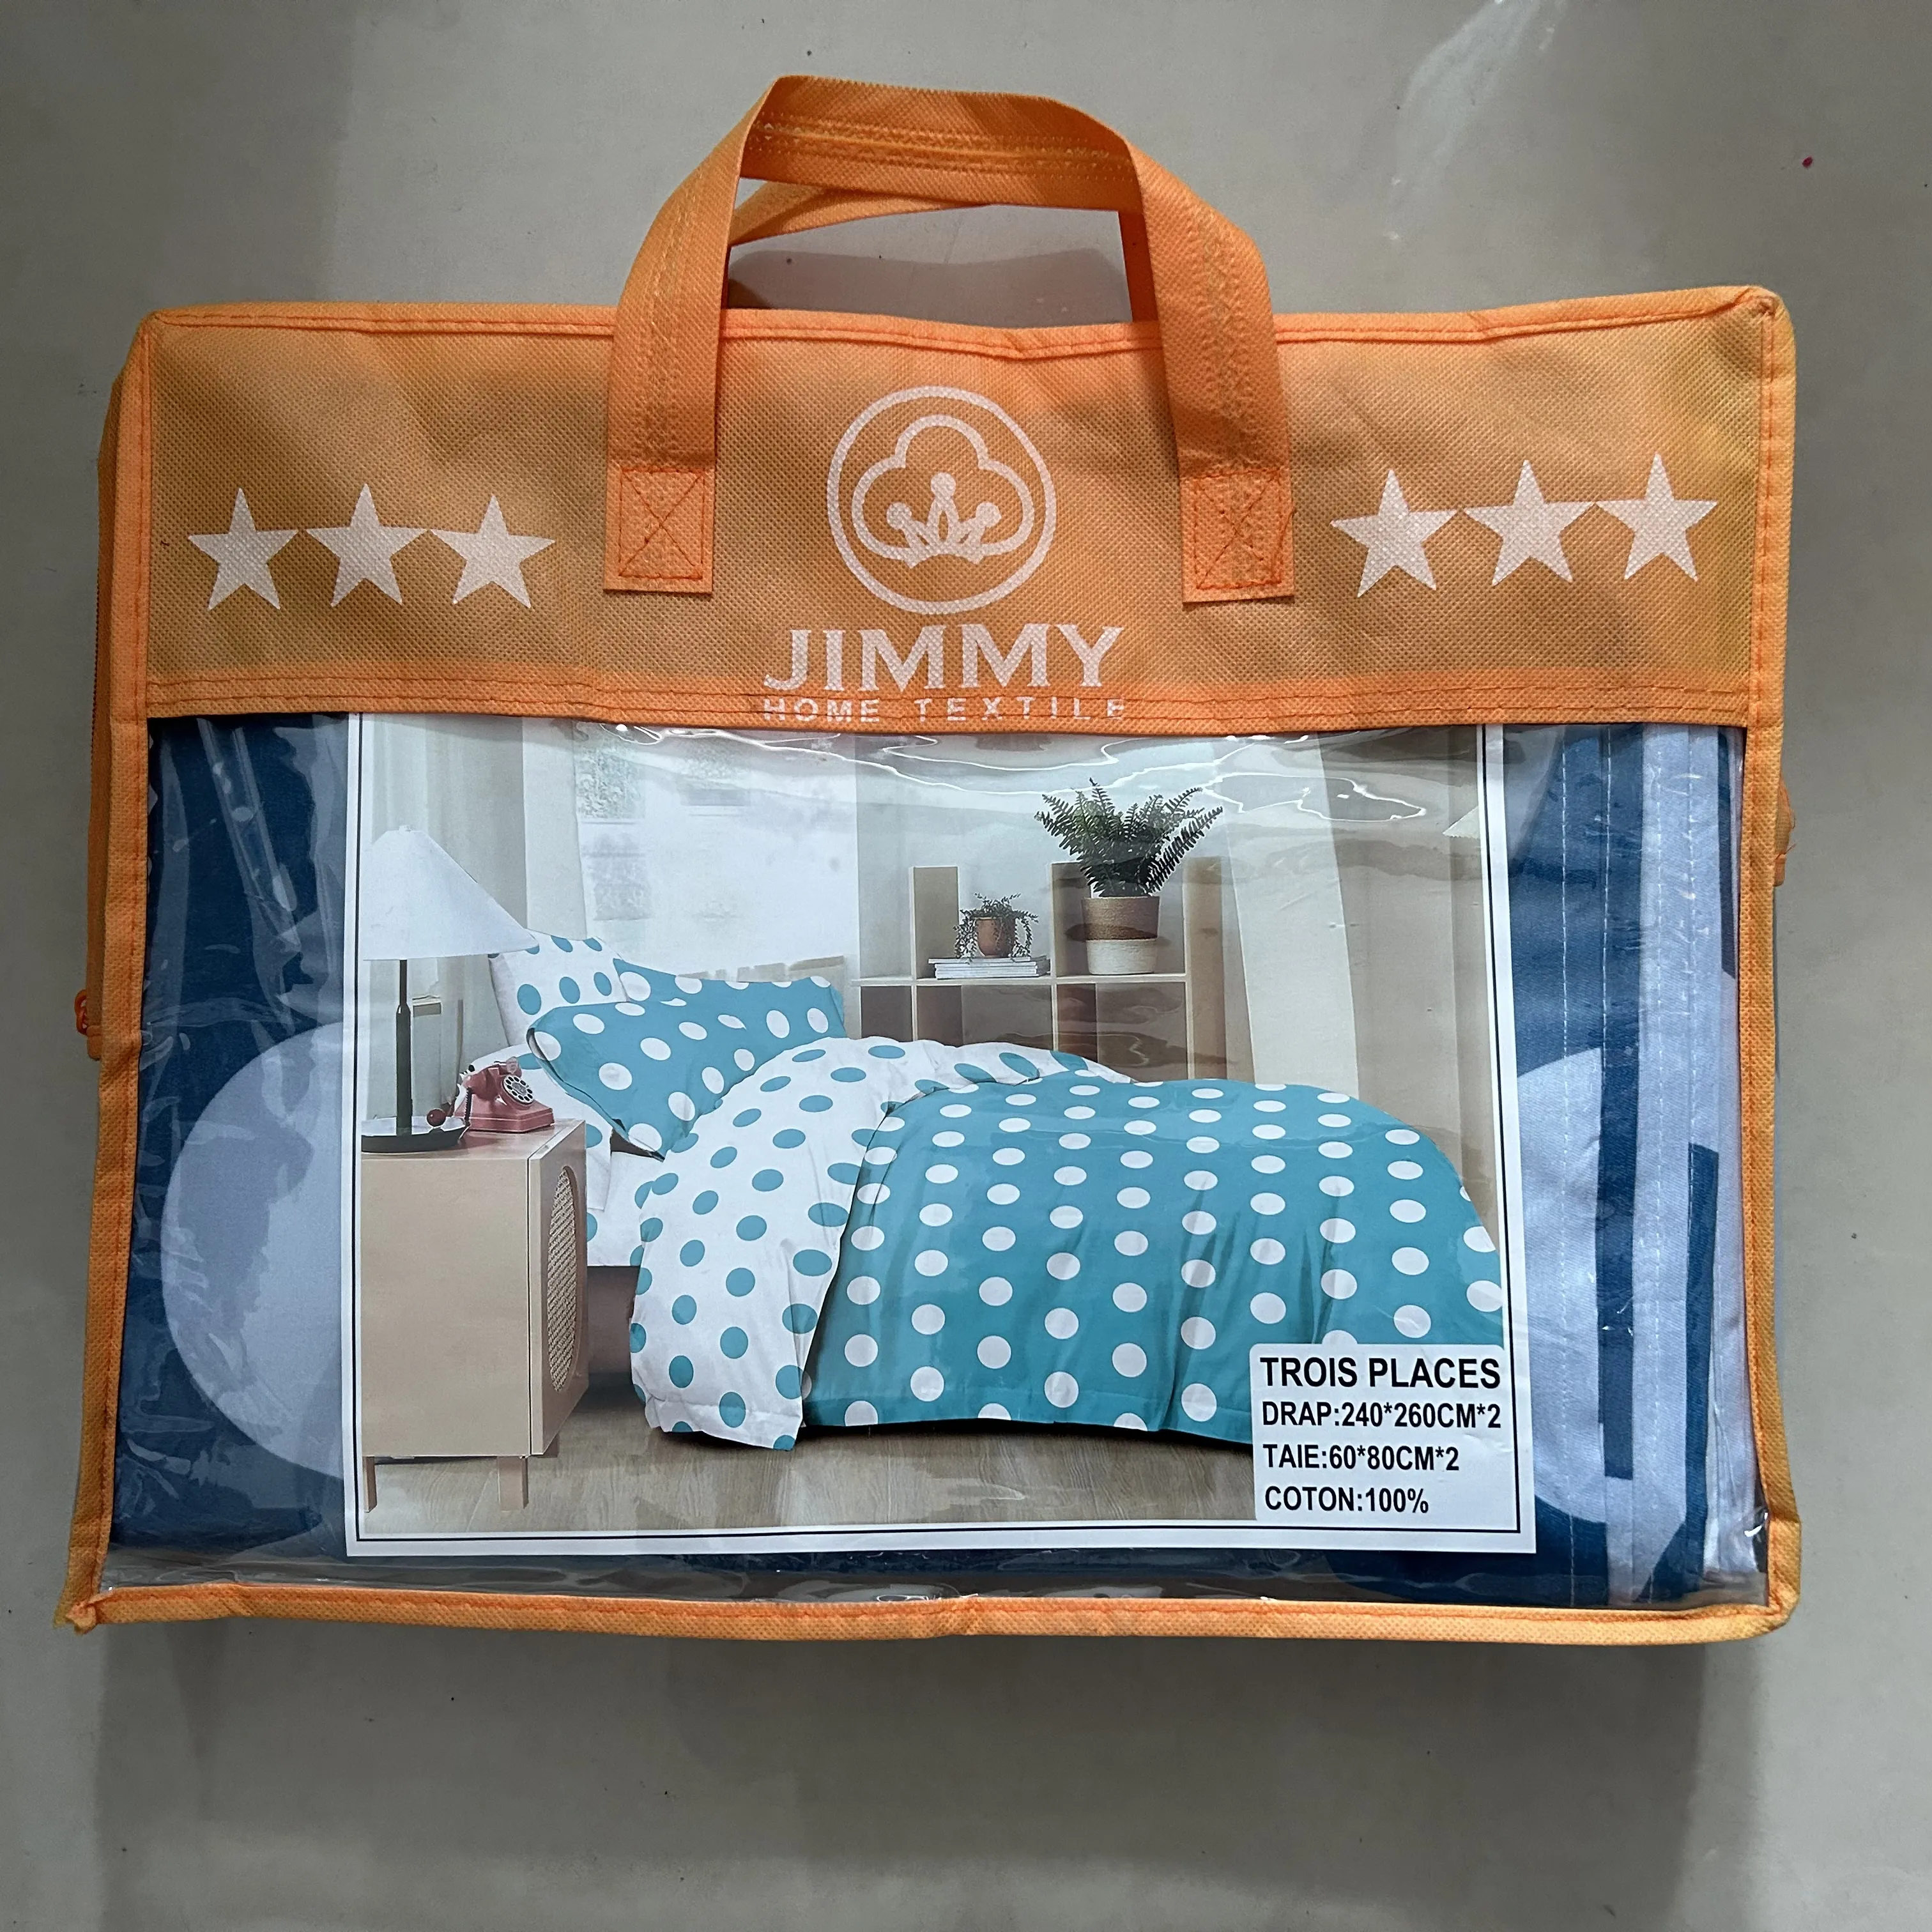 Jimmy Factory bed sheet 4 pieces 3 places good quality flat sheet with pillowcases king size 100% cotton bed sheet set